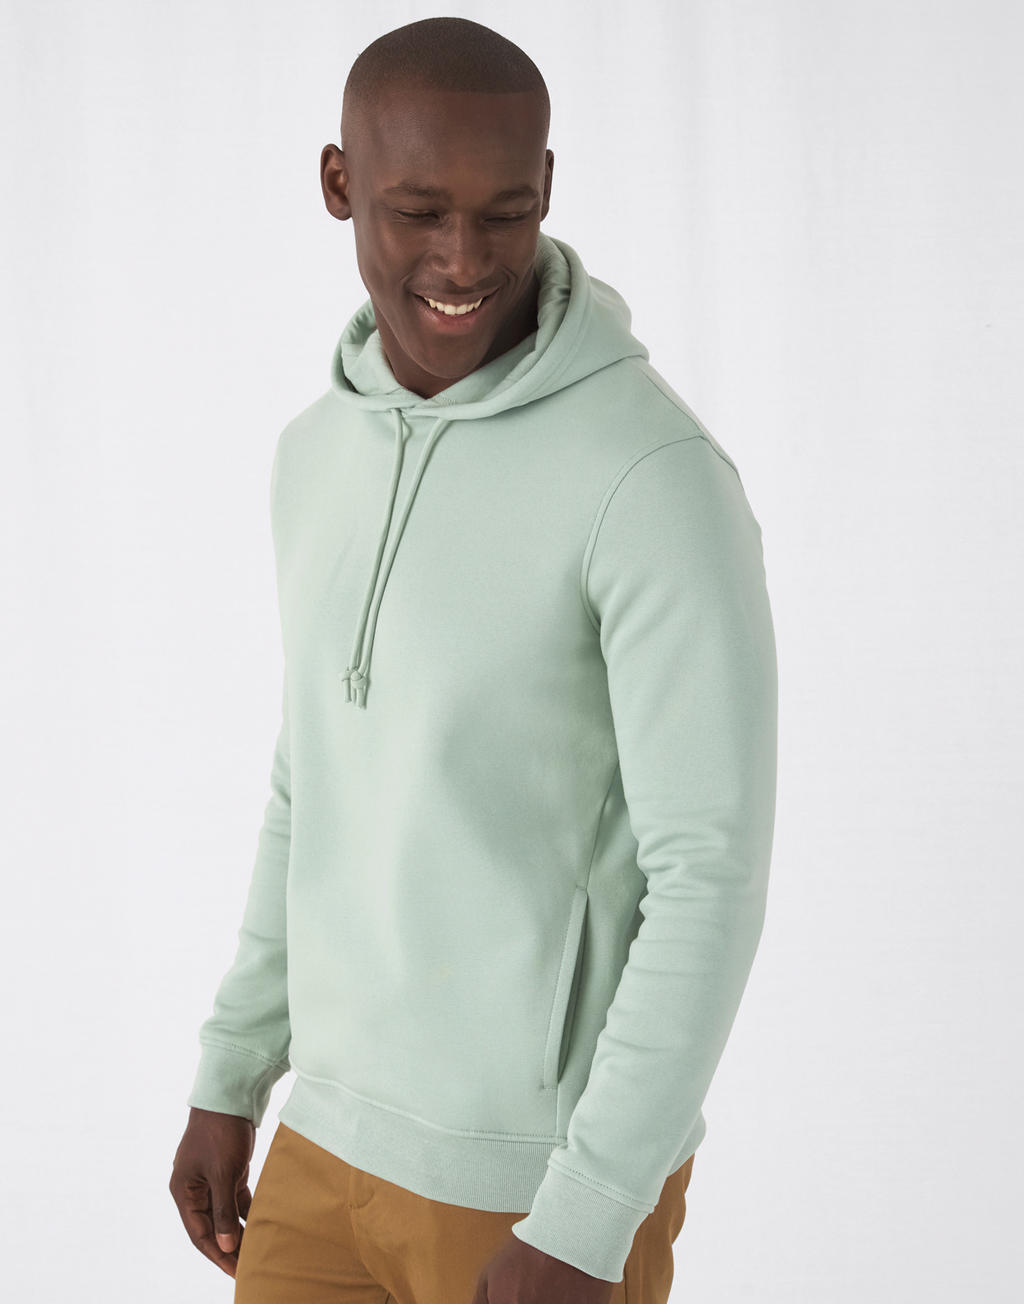  Organic Inspire Hooded_? in Farbe White